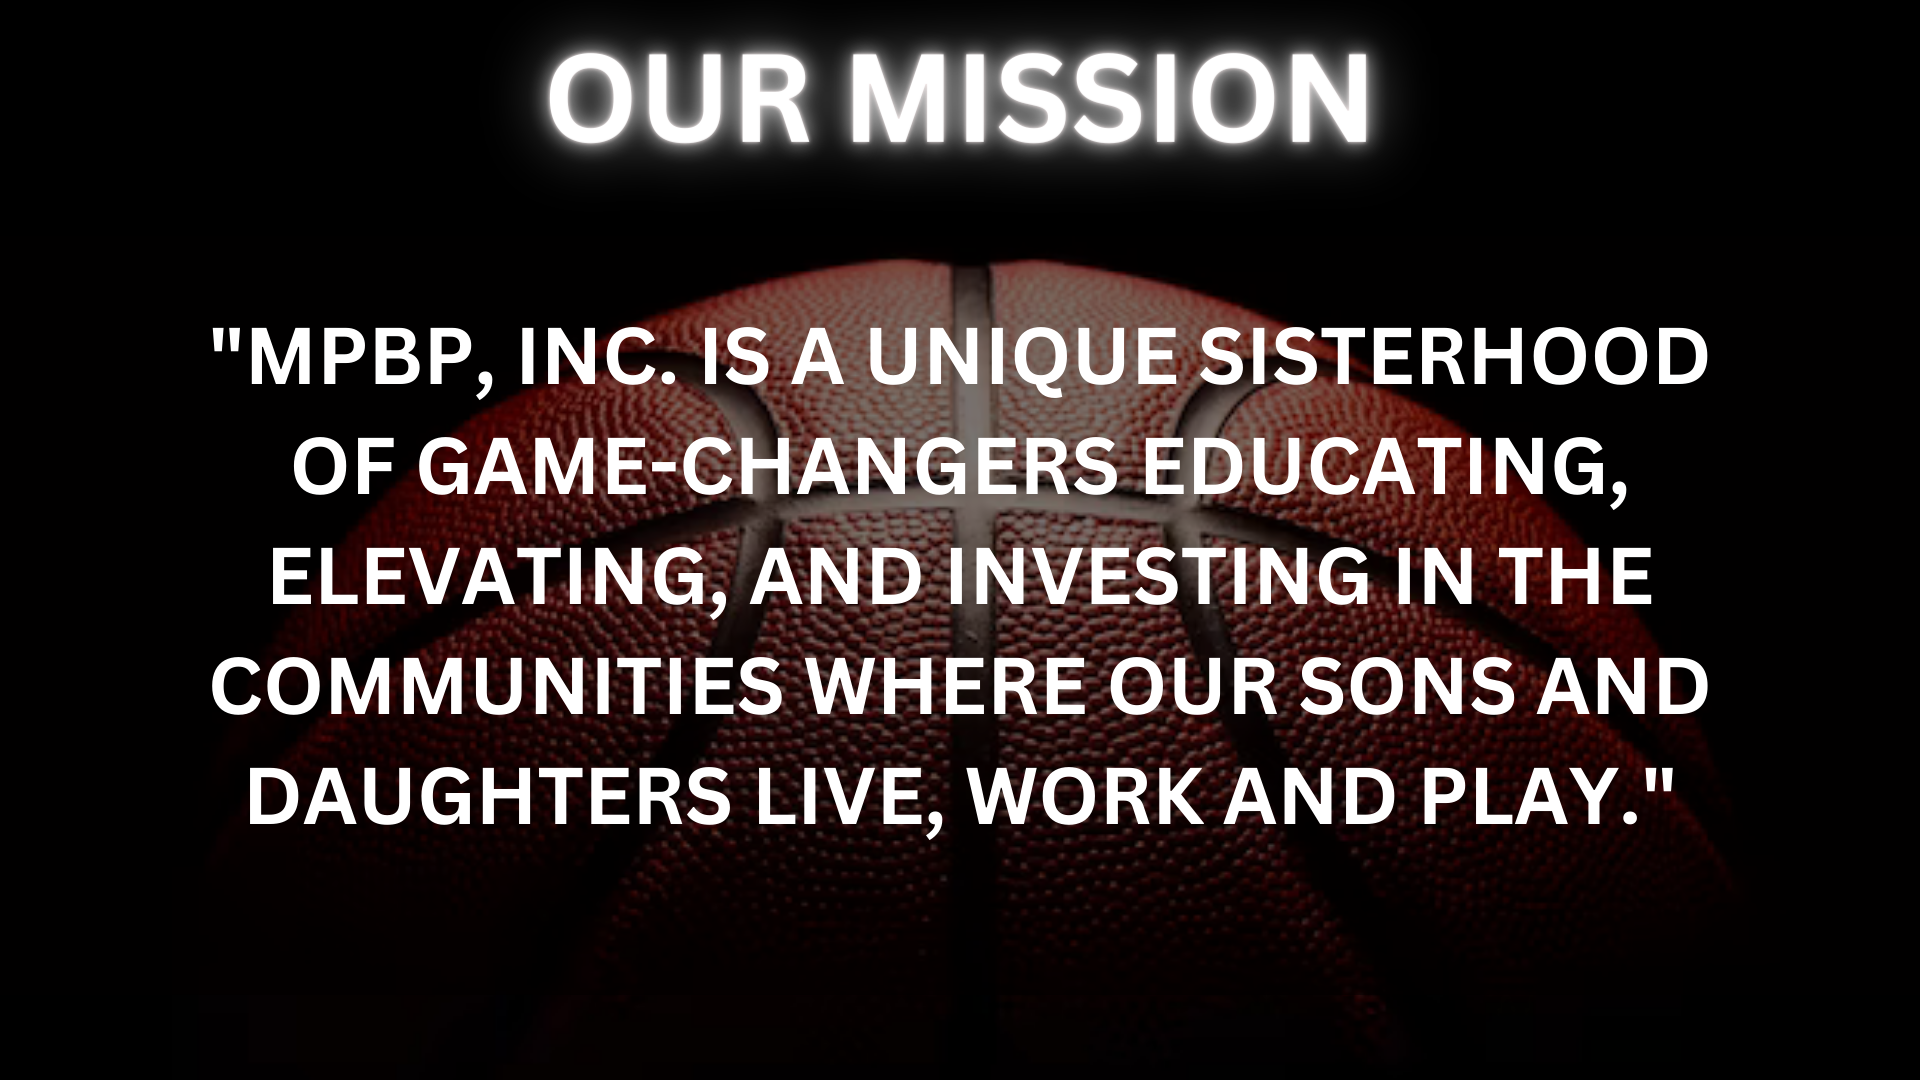 Our Mission Template Background in Dark Tone